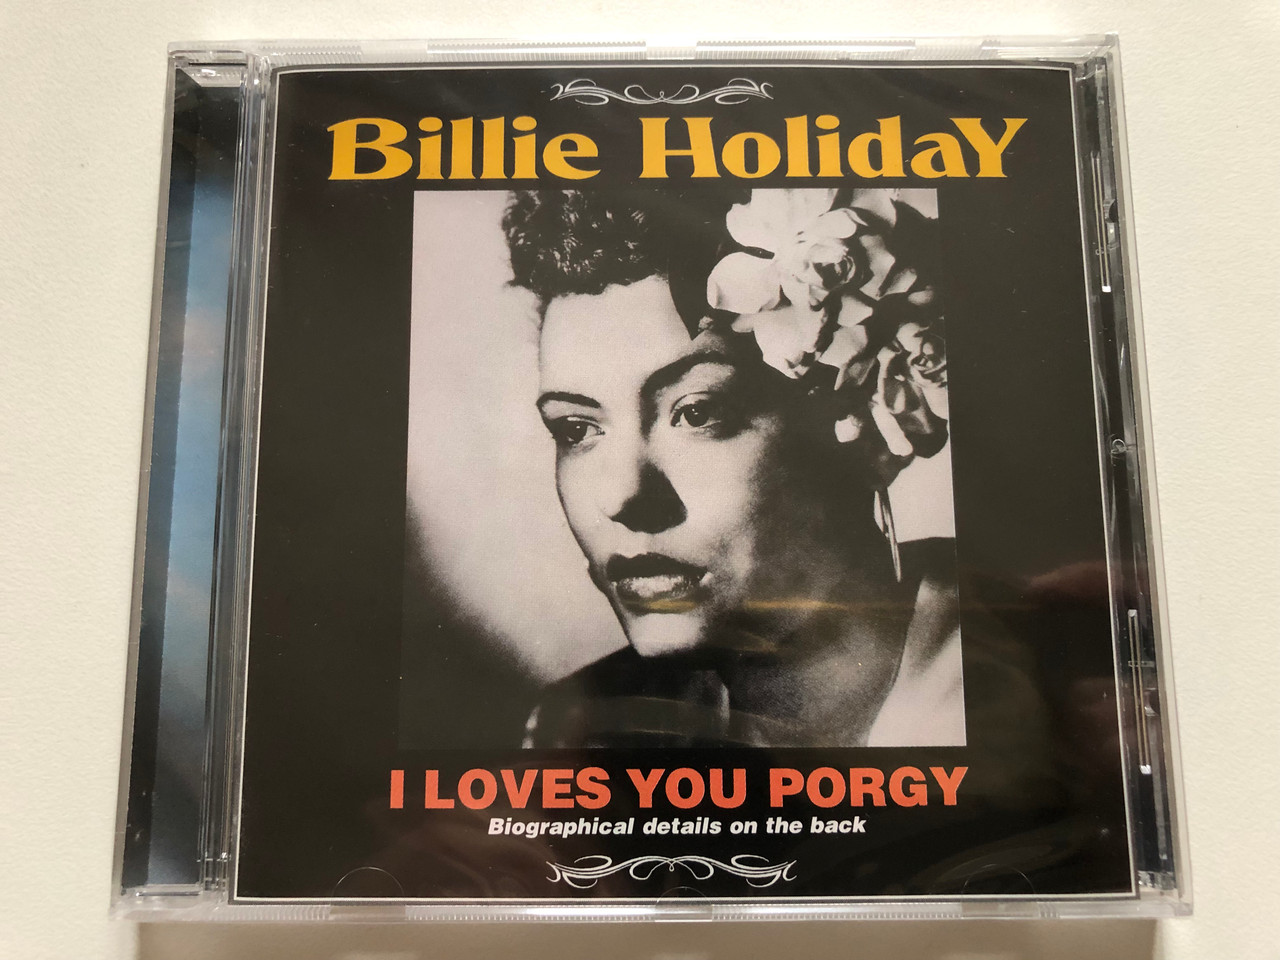 https://cdn10.bigcommerce.com/s-62bdpkt7pb/products/0/images/311279/Billie_Holiday_I_Loves_You_Porgy_Biographical_details_on_the_back_Success_Audio_CD_16008CD_1__51538.1699549160.1280.1280.JPG?c=2